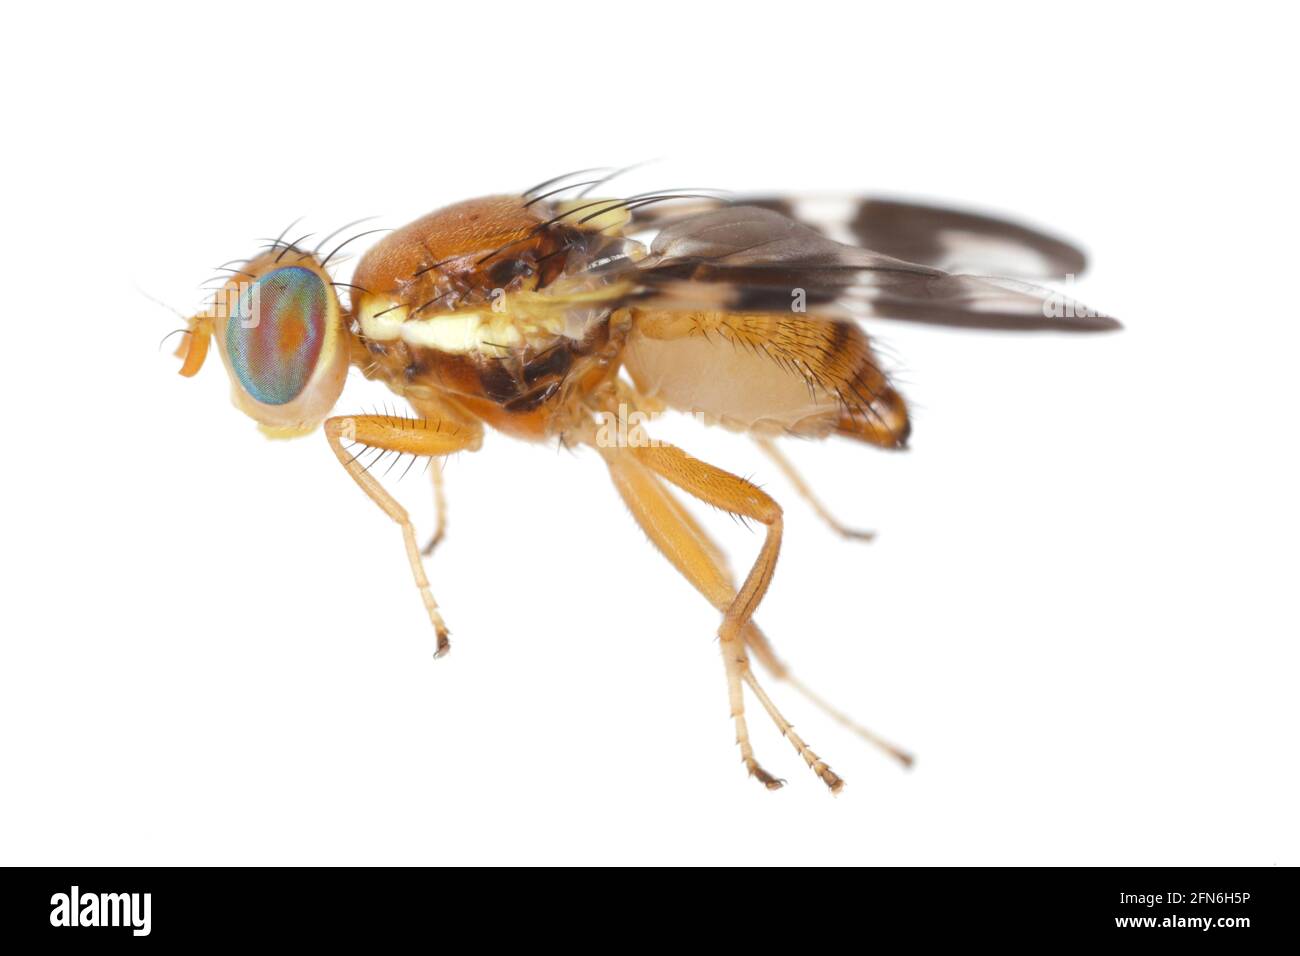 Walnut husk fly (Rhagoletis completa) it is quarantine species of tephritid or fruit flies whose larvae damage walnuts. Isolated on a white background Stock Photo